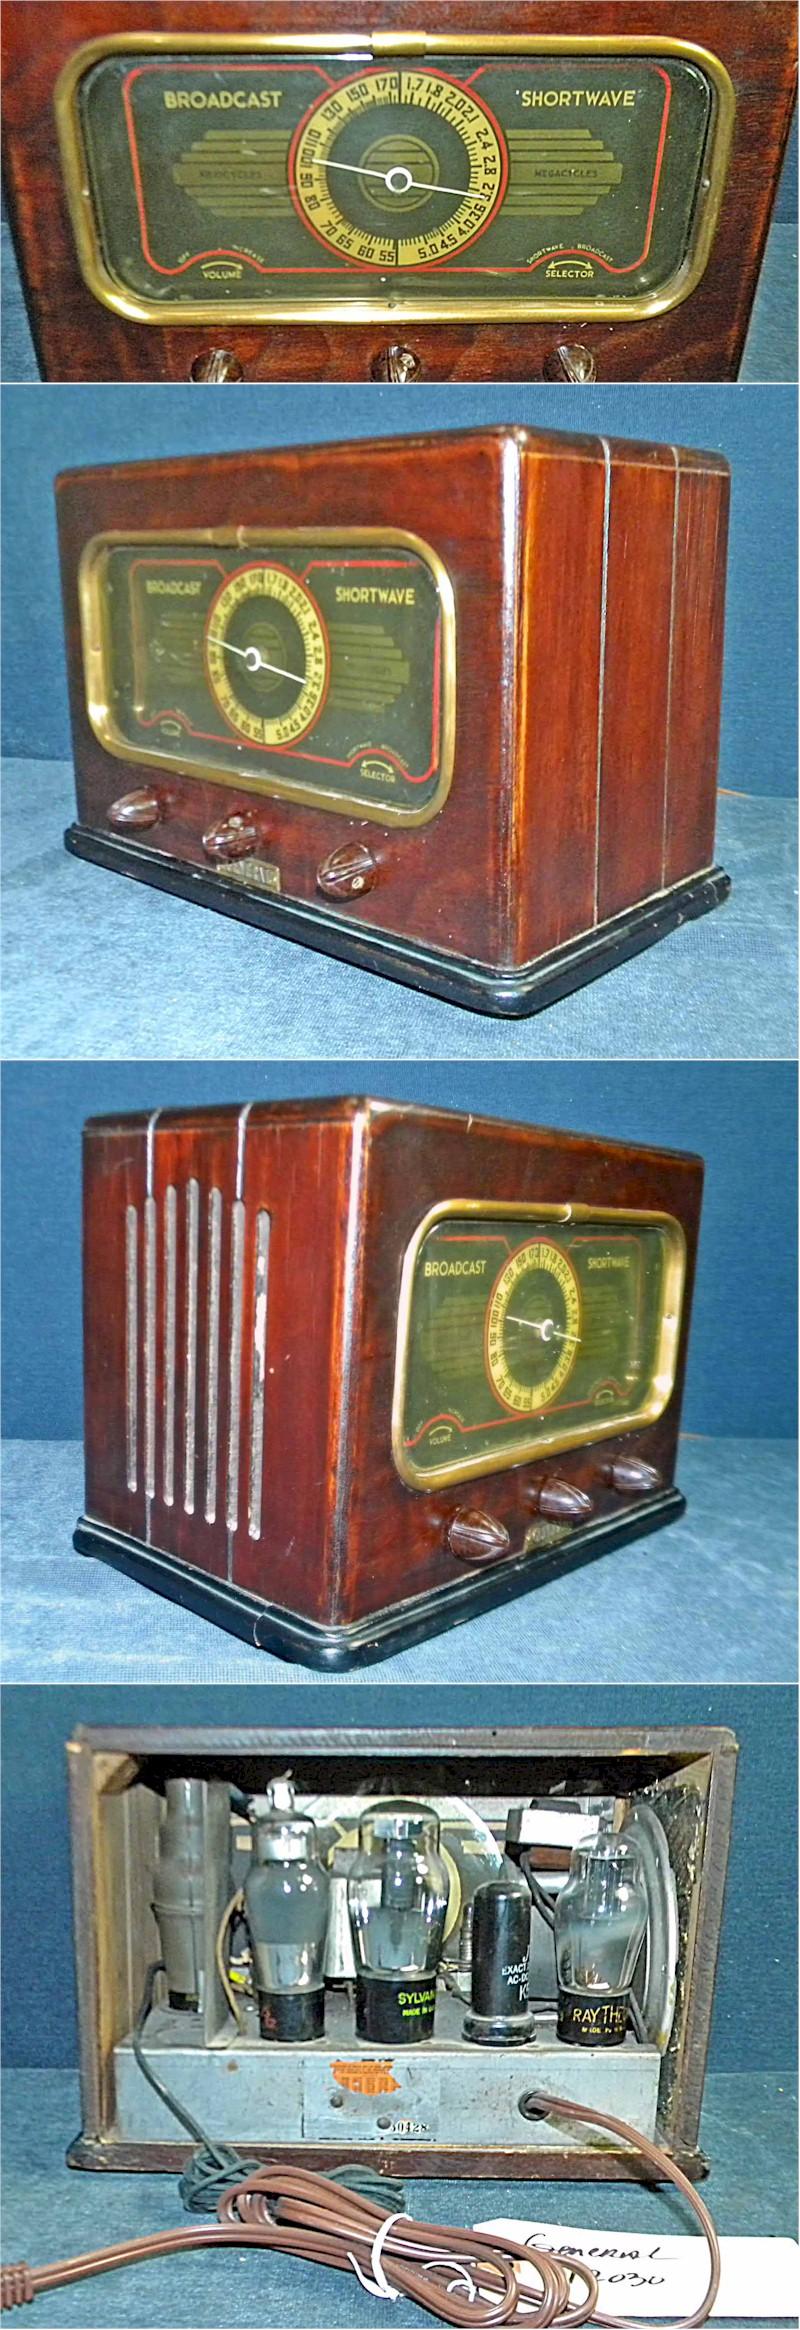 General Television 623 (1934)